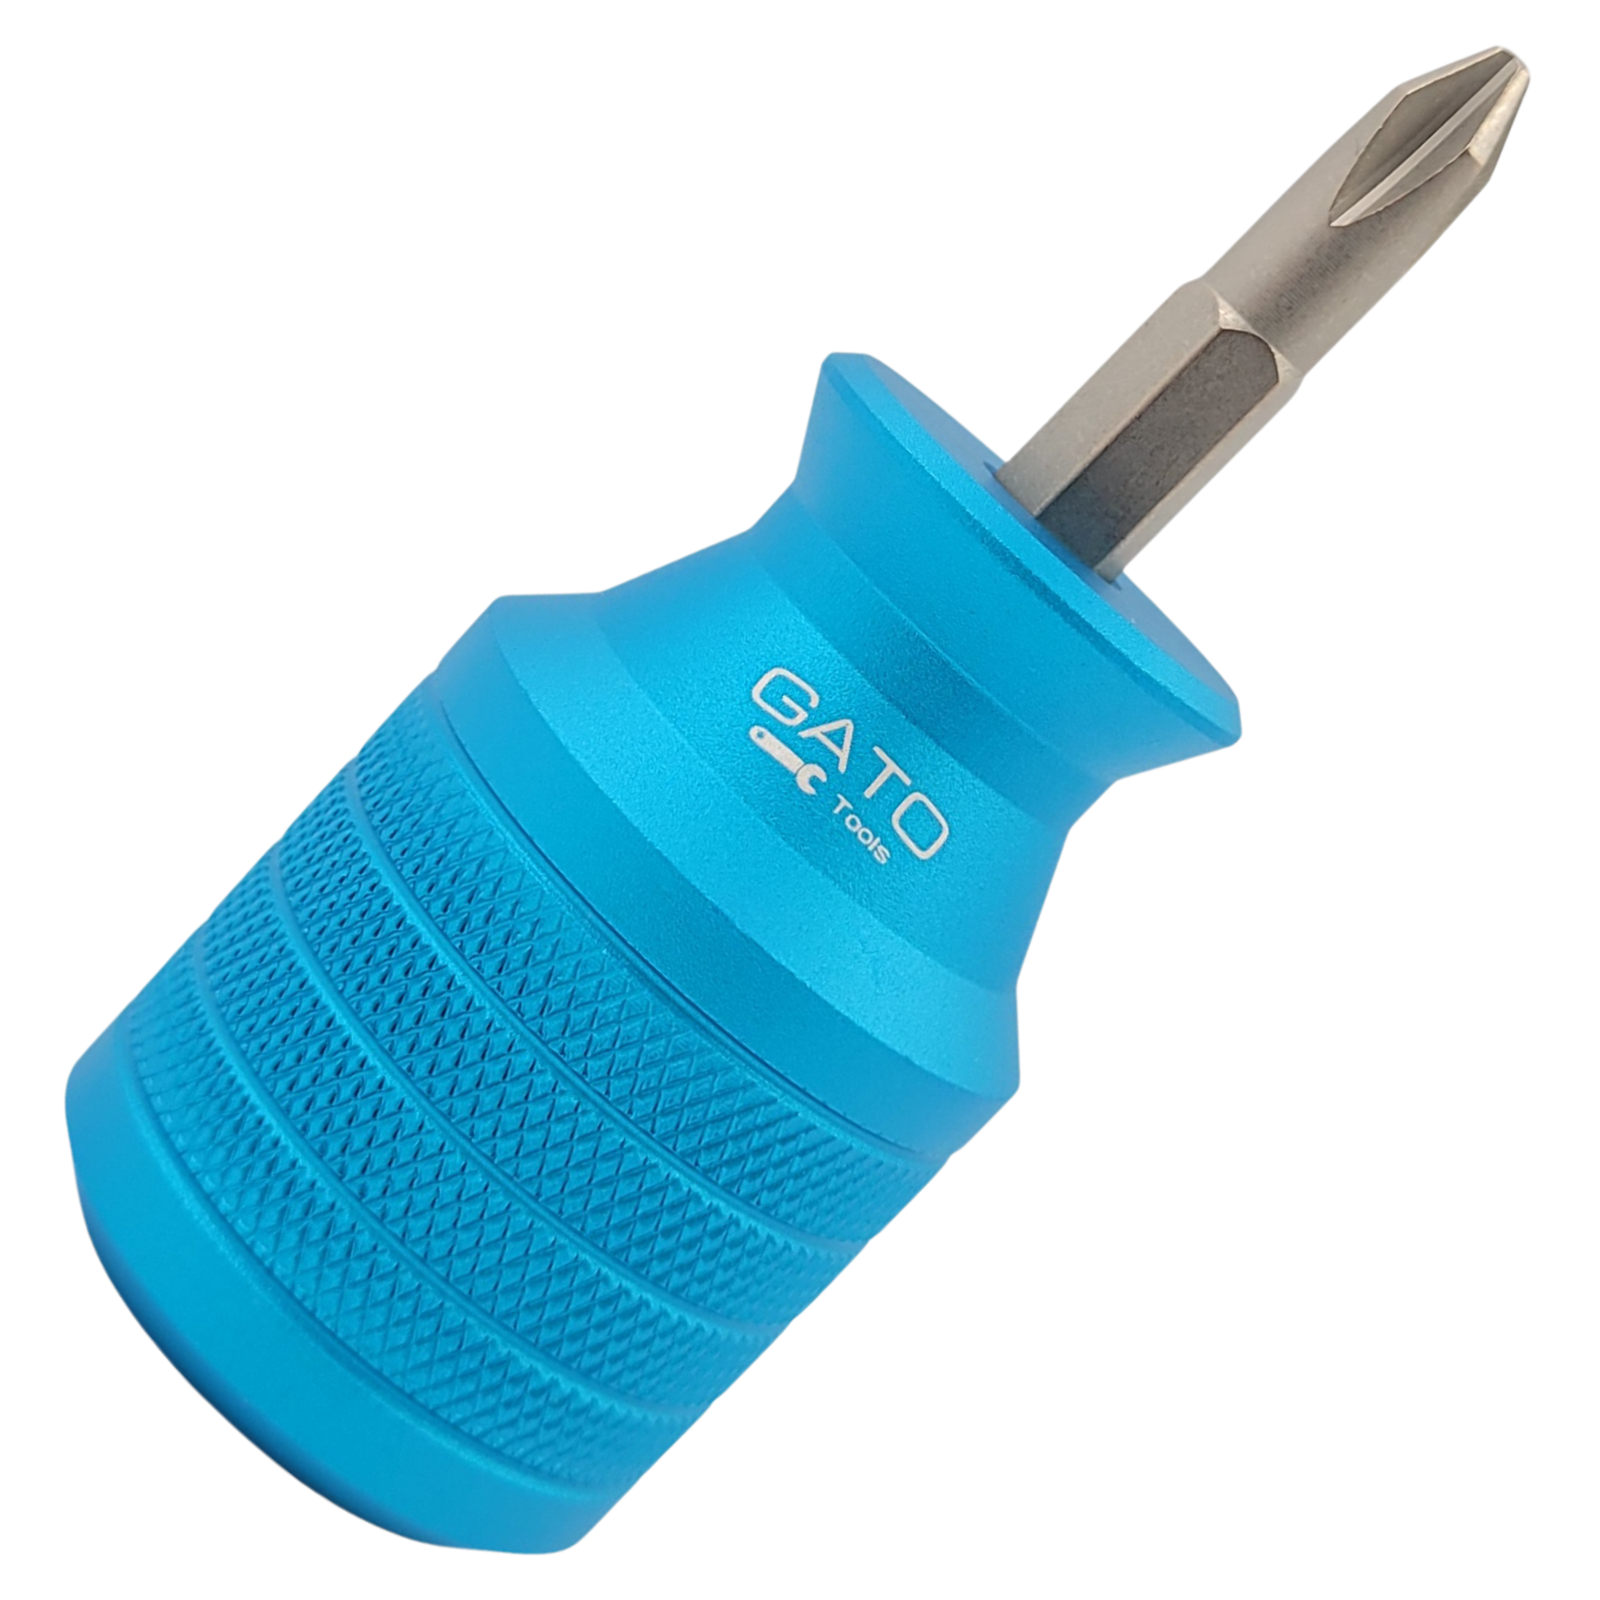 Magnetic Short Stubby Screwdriver - Double Ended with Phillips and Slotted Flat - $17.99